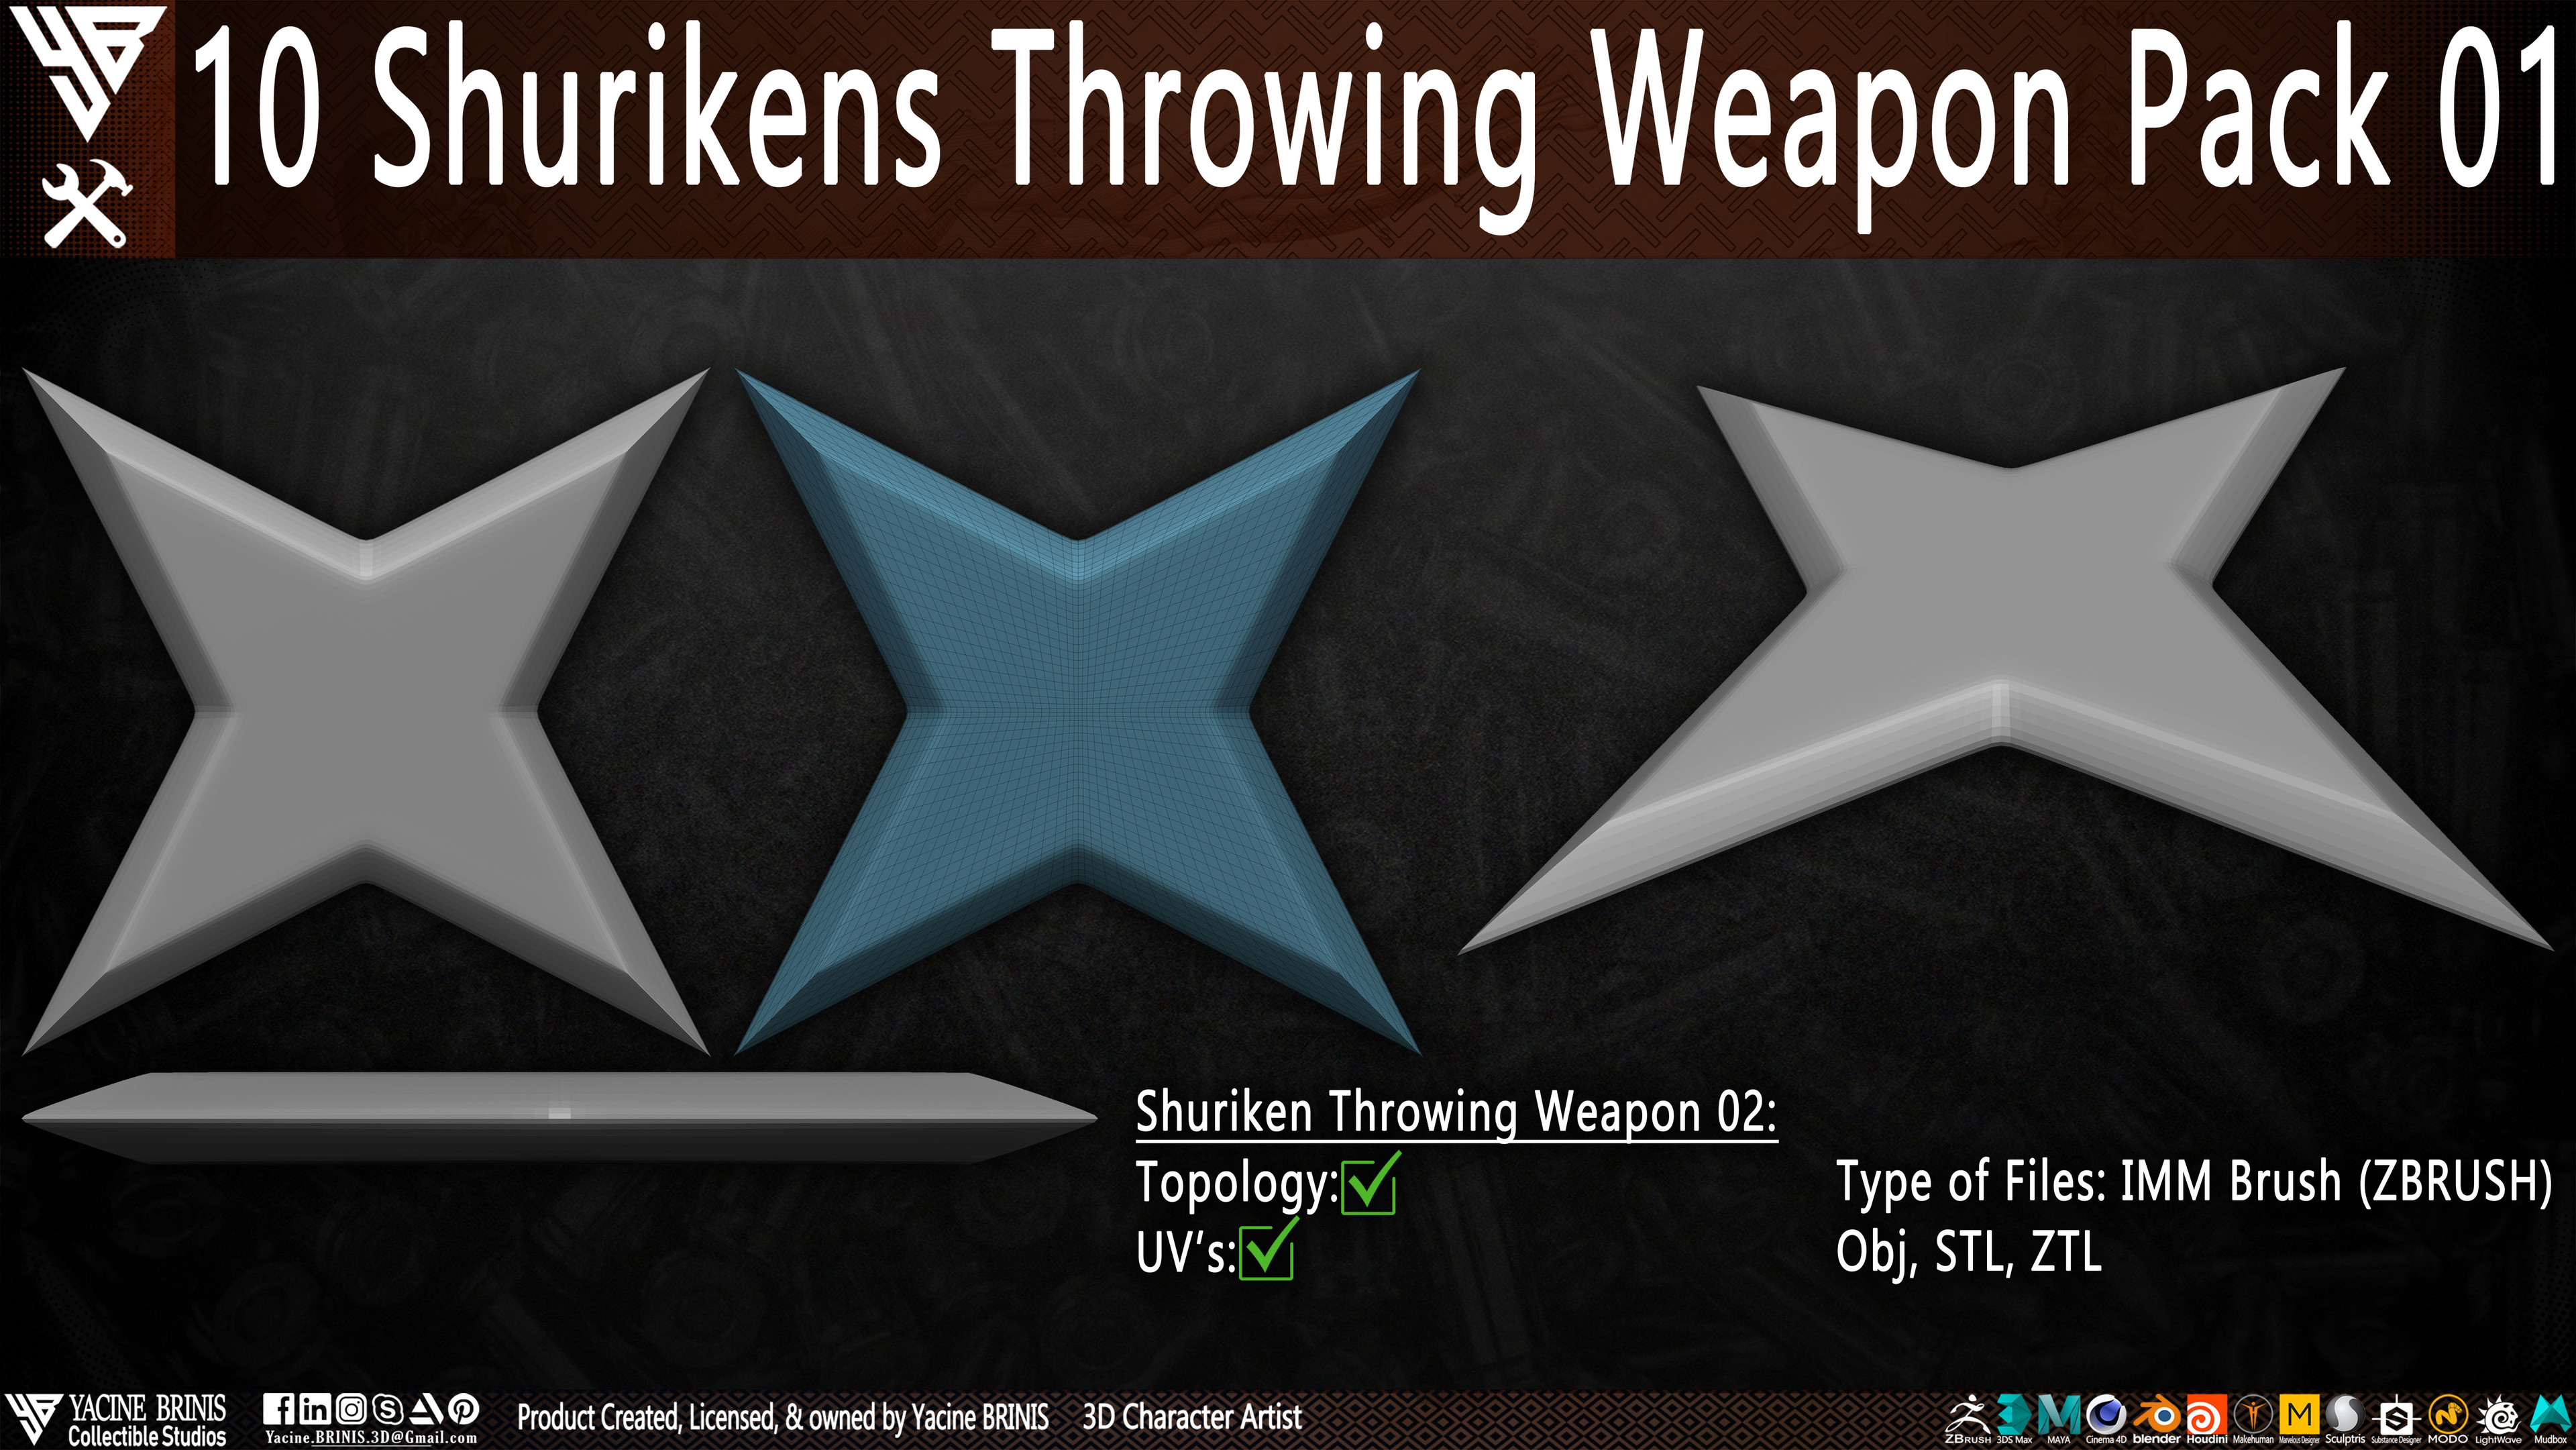 10 Shurikens Throwing Weapon Pack 01 sculpted by Yacine BRINIS Set 06